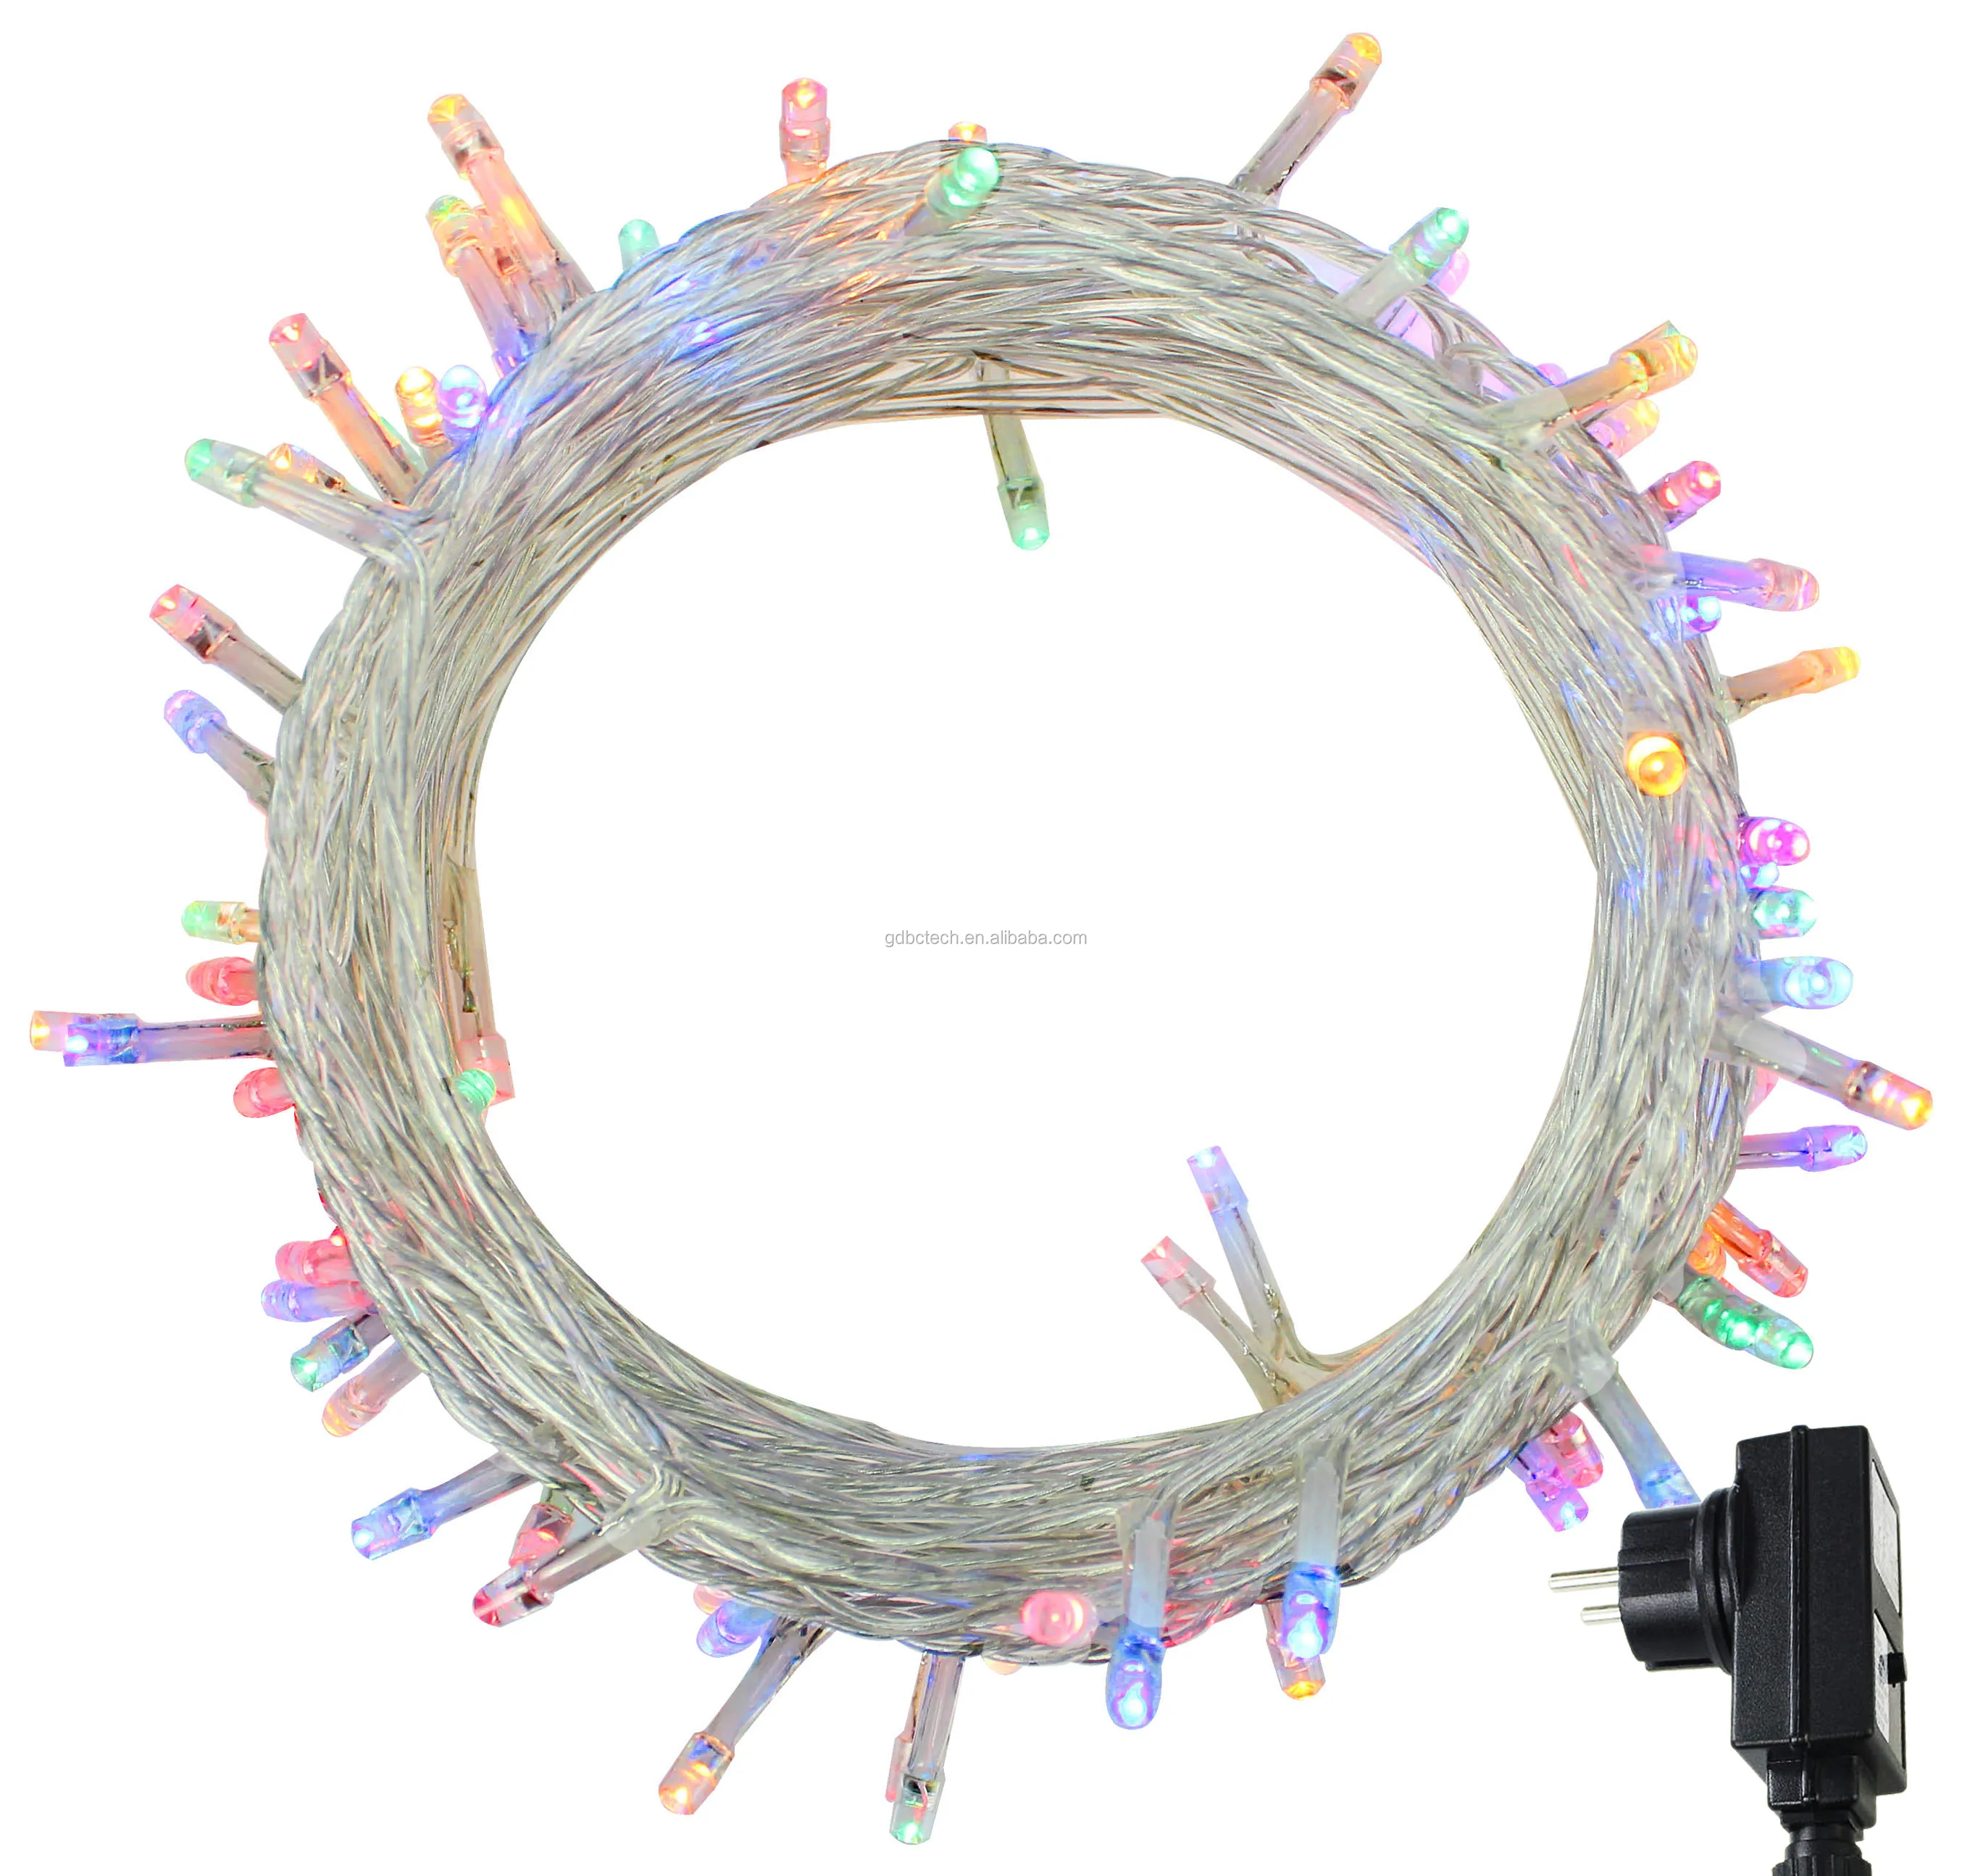 Xmas Wholesale Warm White 100 Meter 1000 UL Party Multicolor 8 Modes Cluster Lights Waterproof Led Fairy String Light